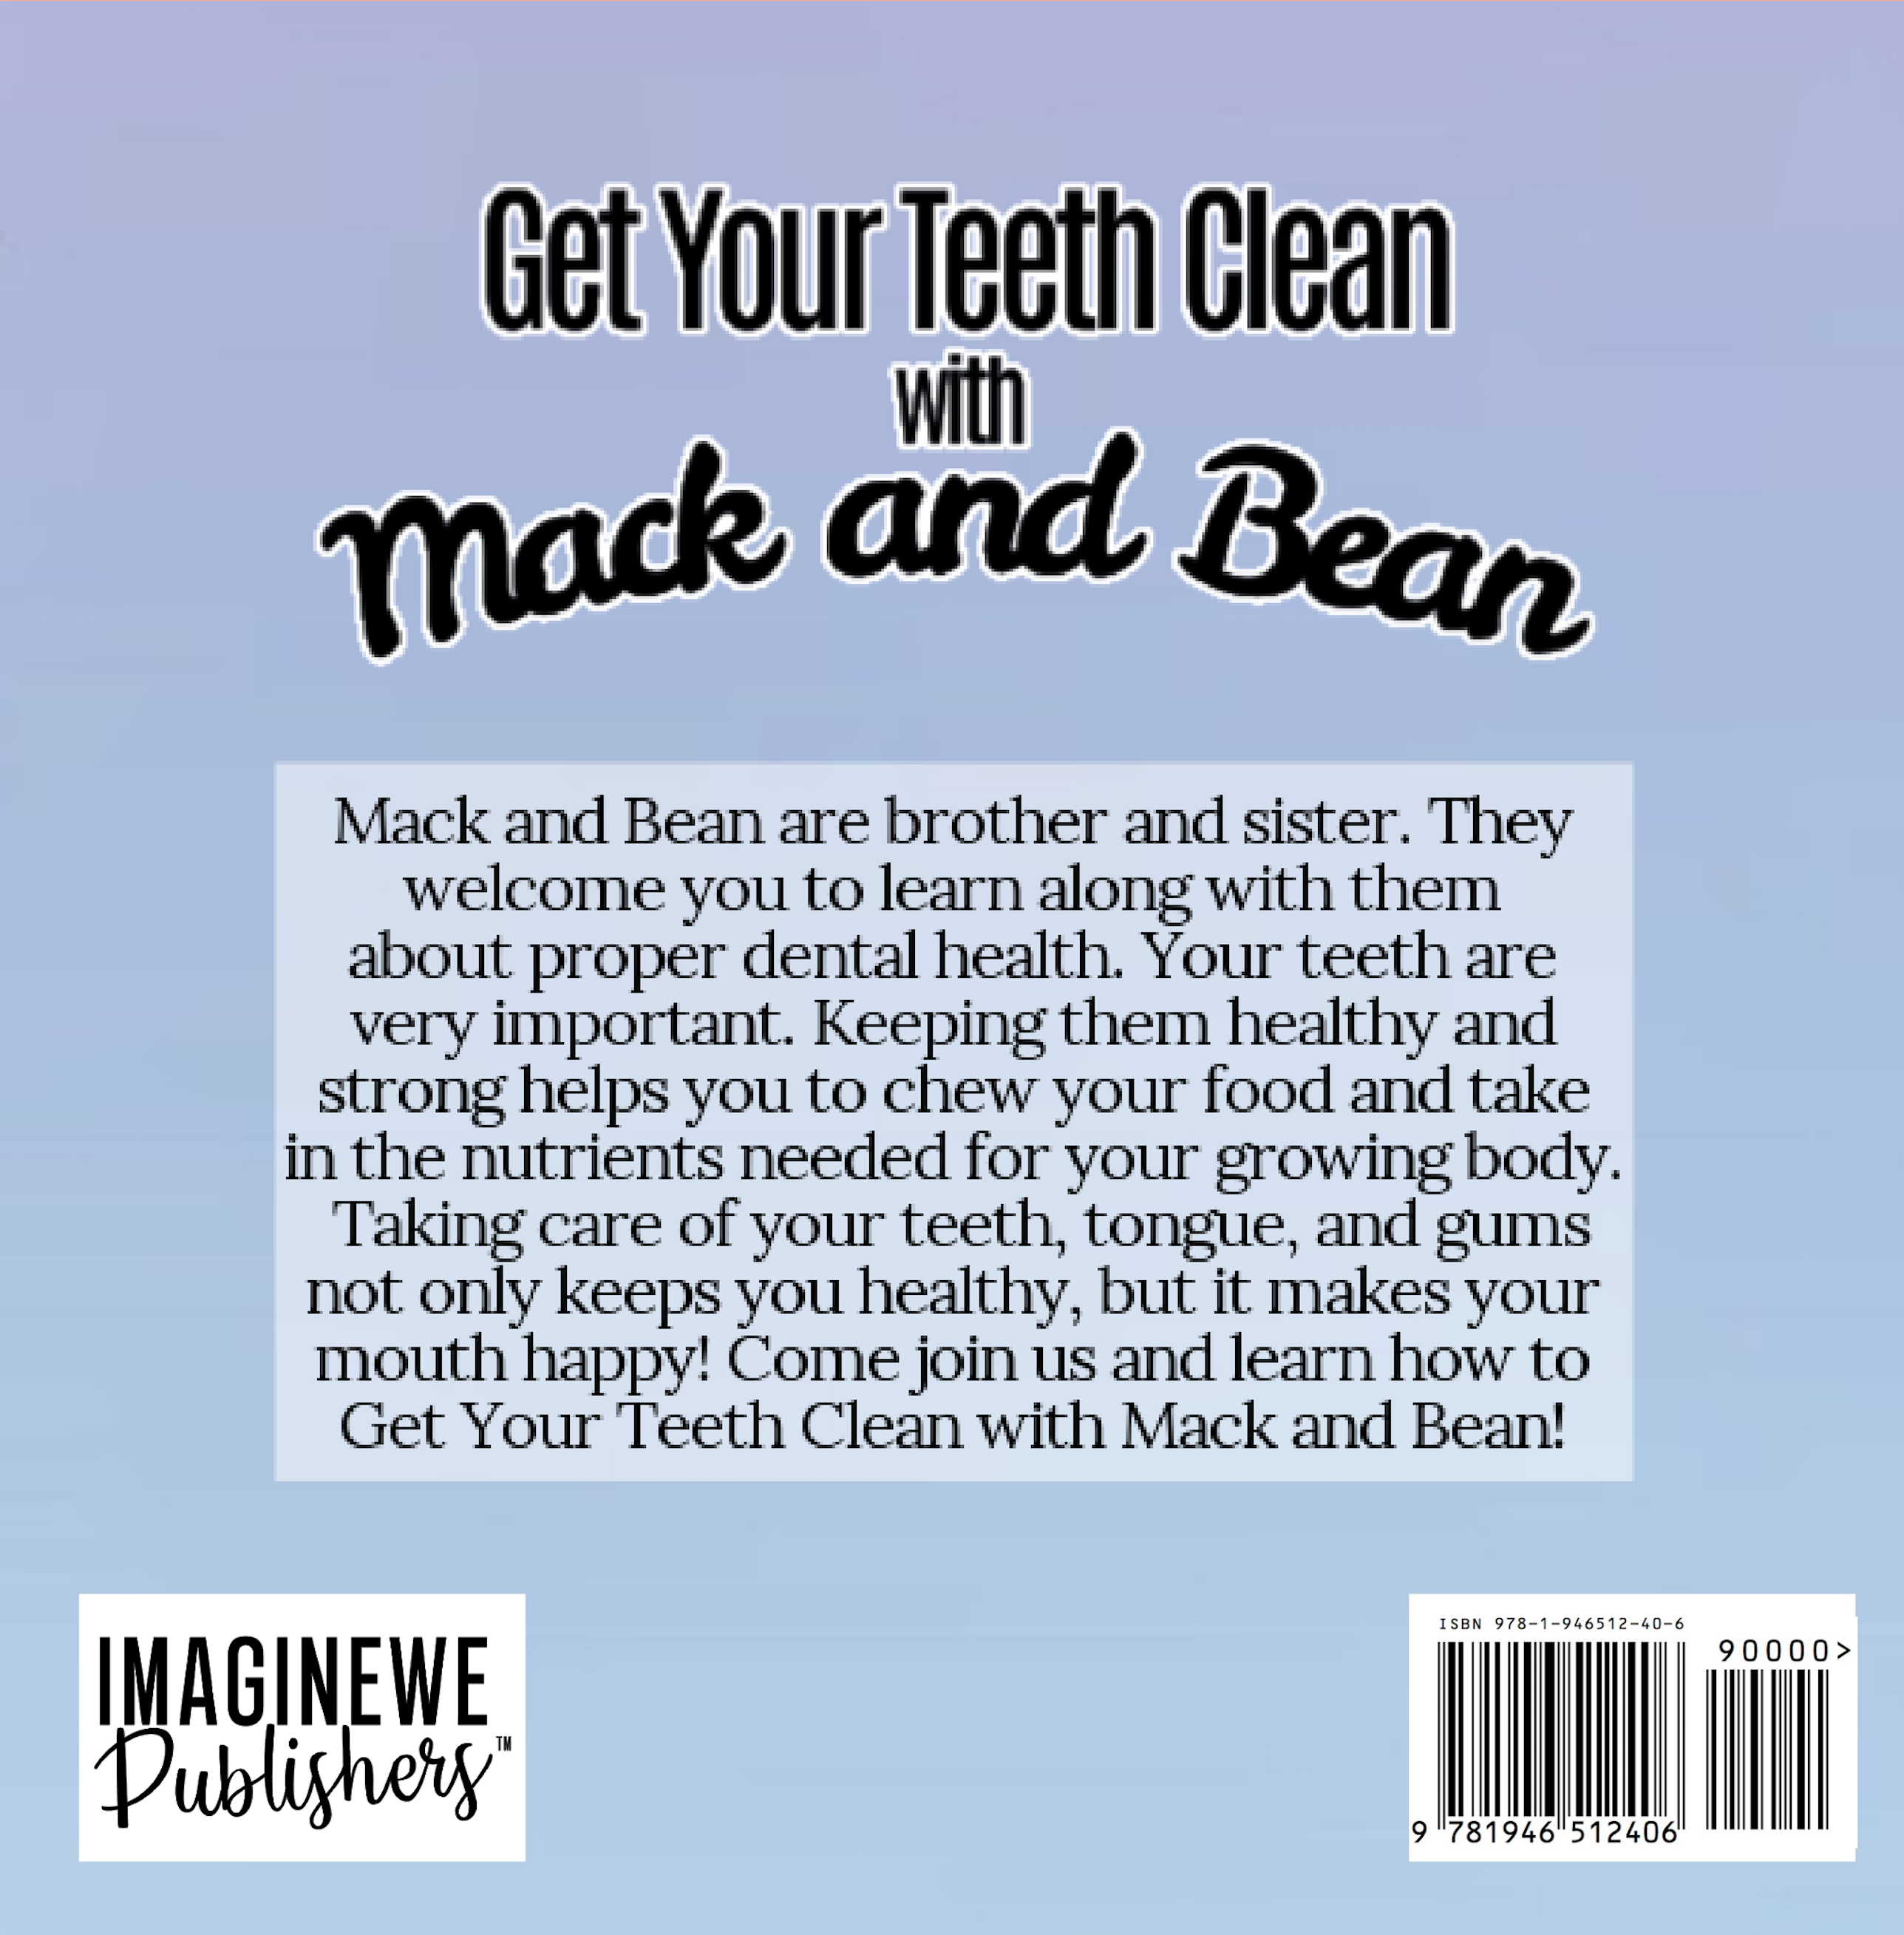 Get Your Teeth Clean with Mack and Bean (NEW RELEASE) - ImagineWe Publishers